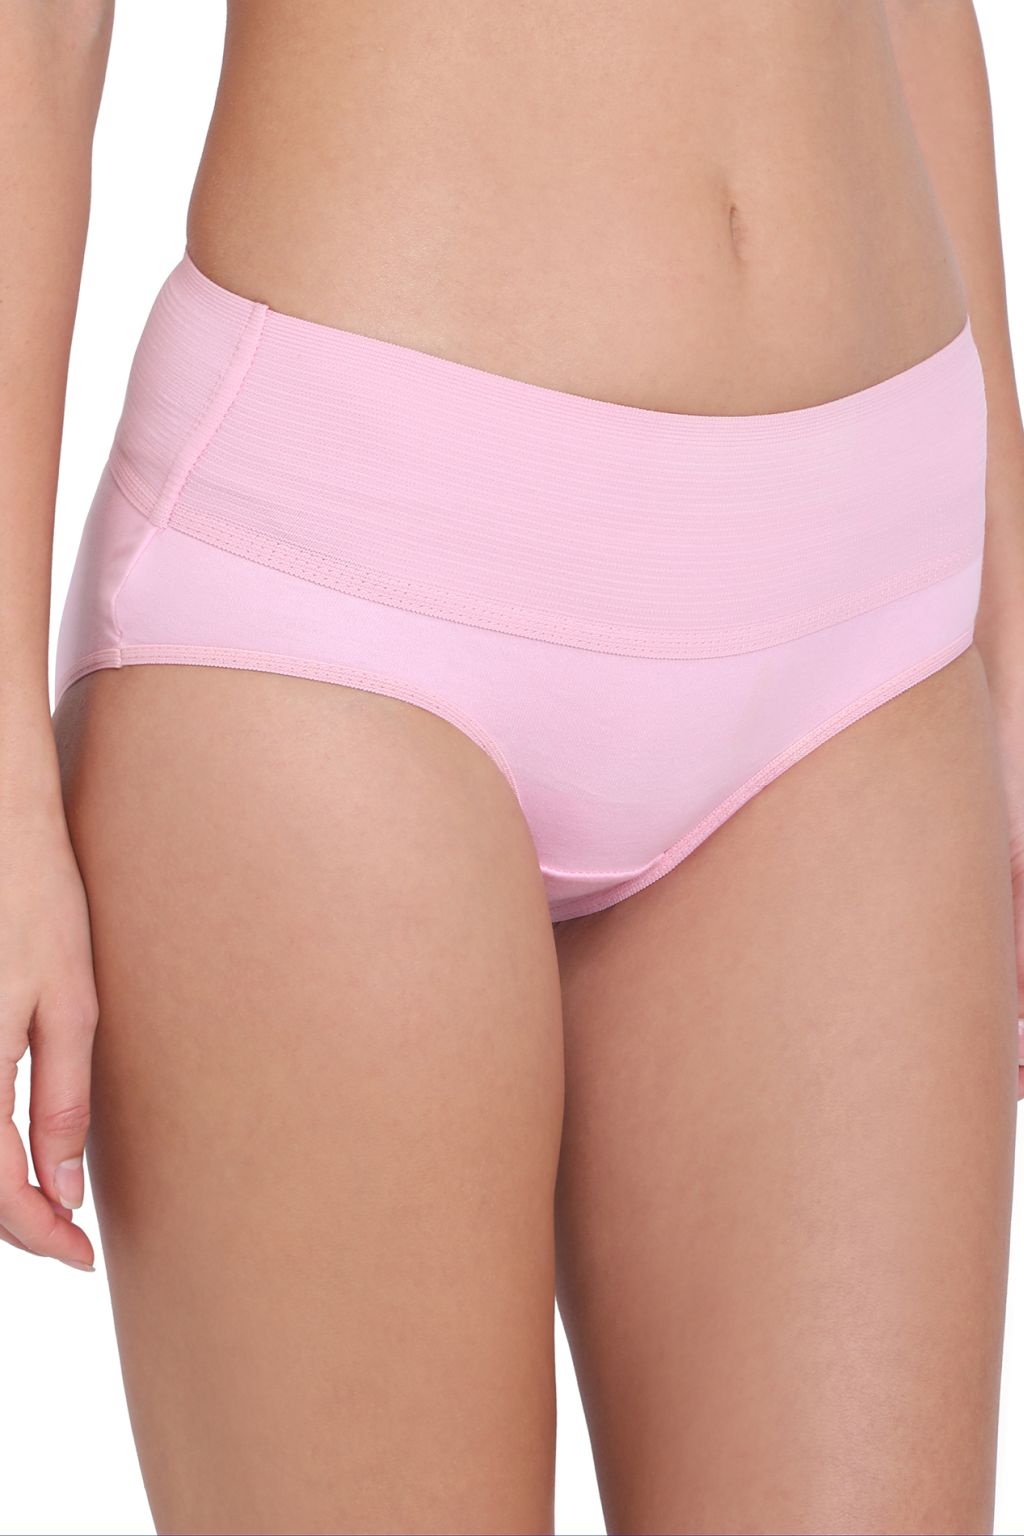 276 - Pink Panties for Women - Cotton Solid Panty